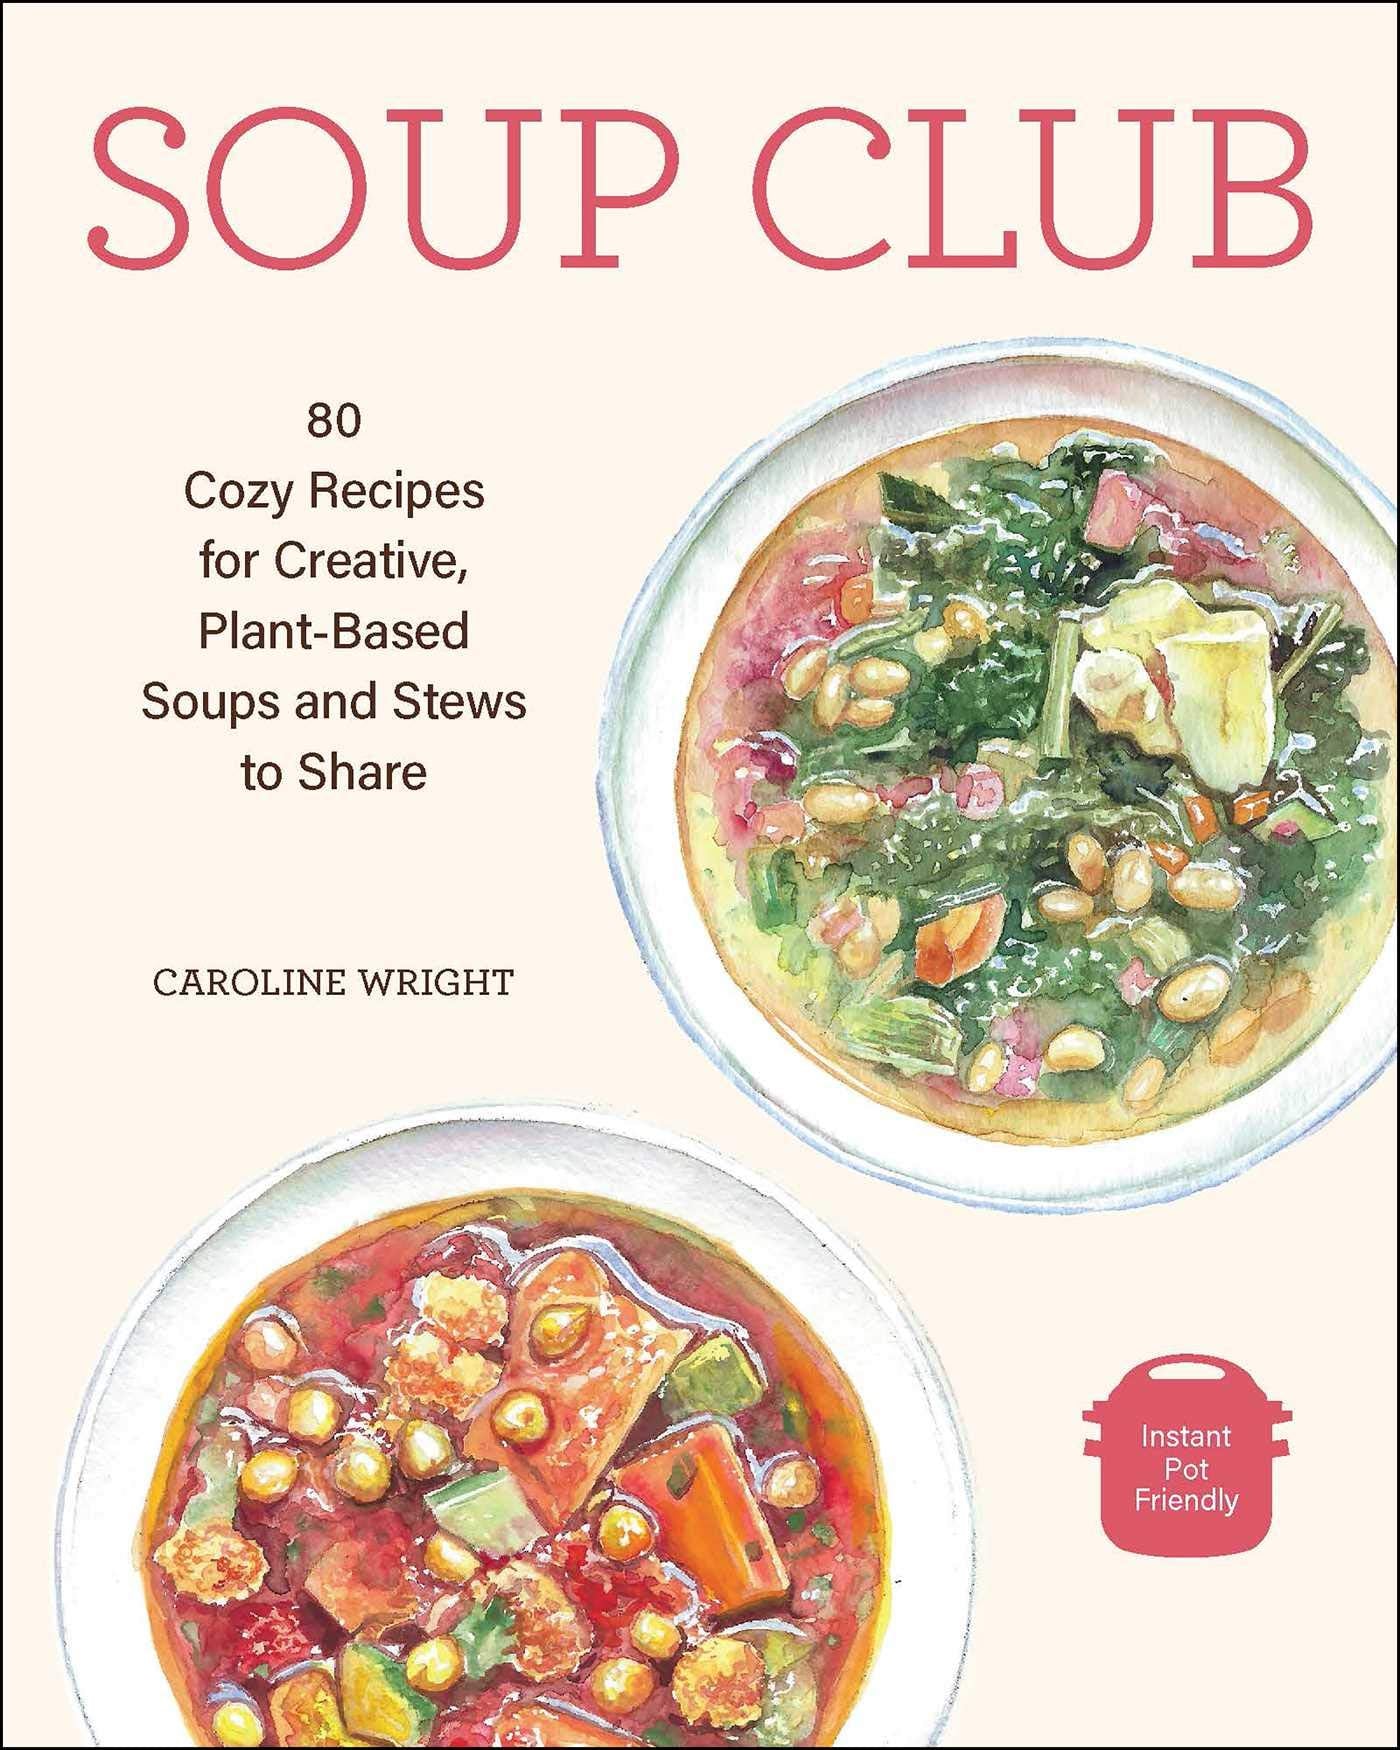 Soup Club: 80 Cozy Recipes for Creative Plant-Based Soups and Stews to Share (Caroline Wright)